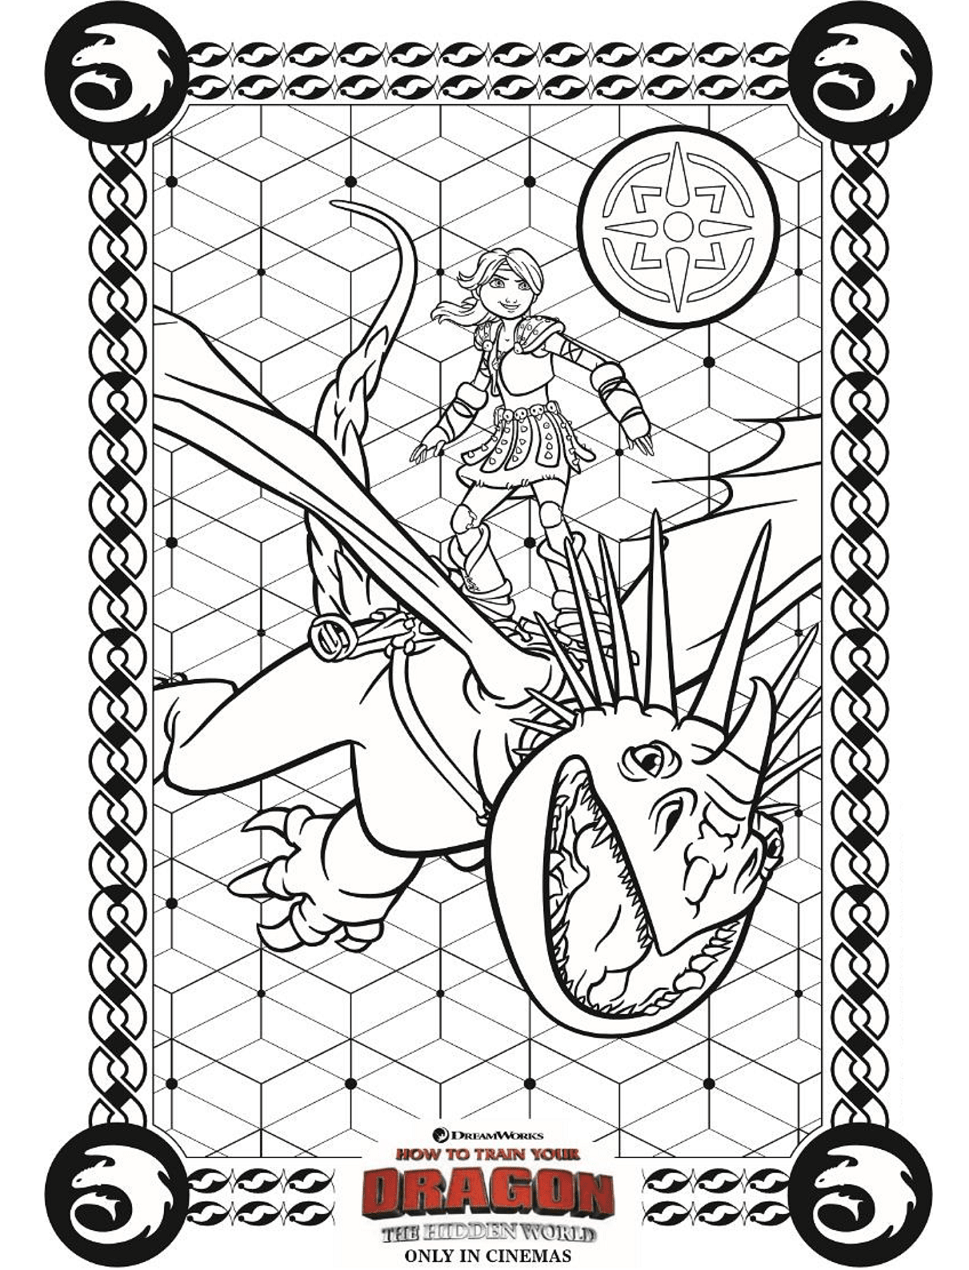 Astrid On Stormfly Coloring Page - Free Printable Coloring Pages for Kids